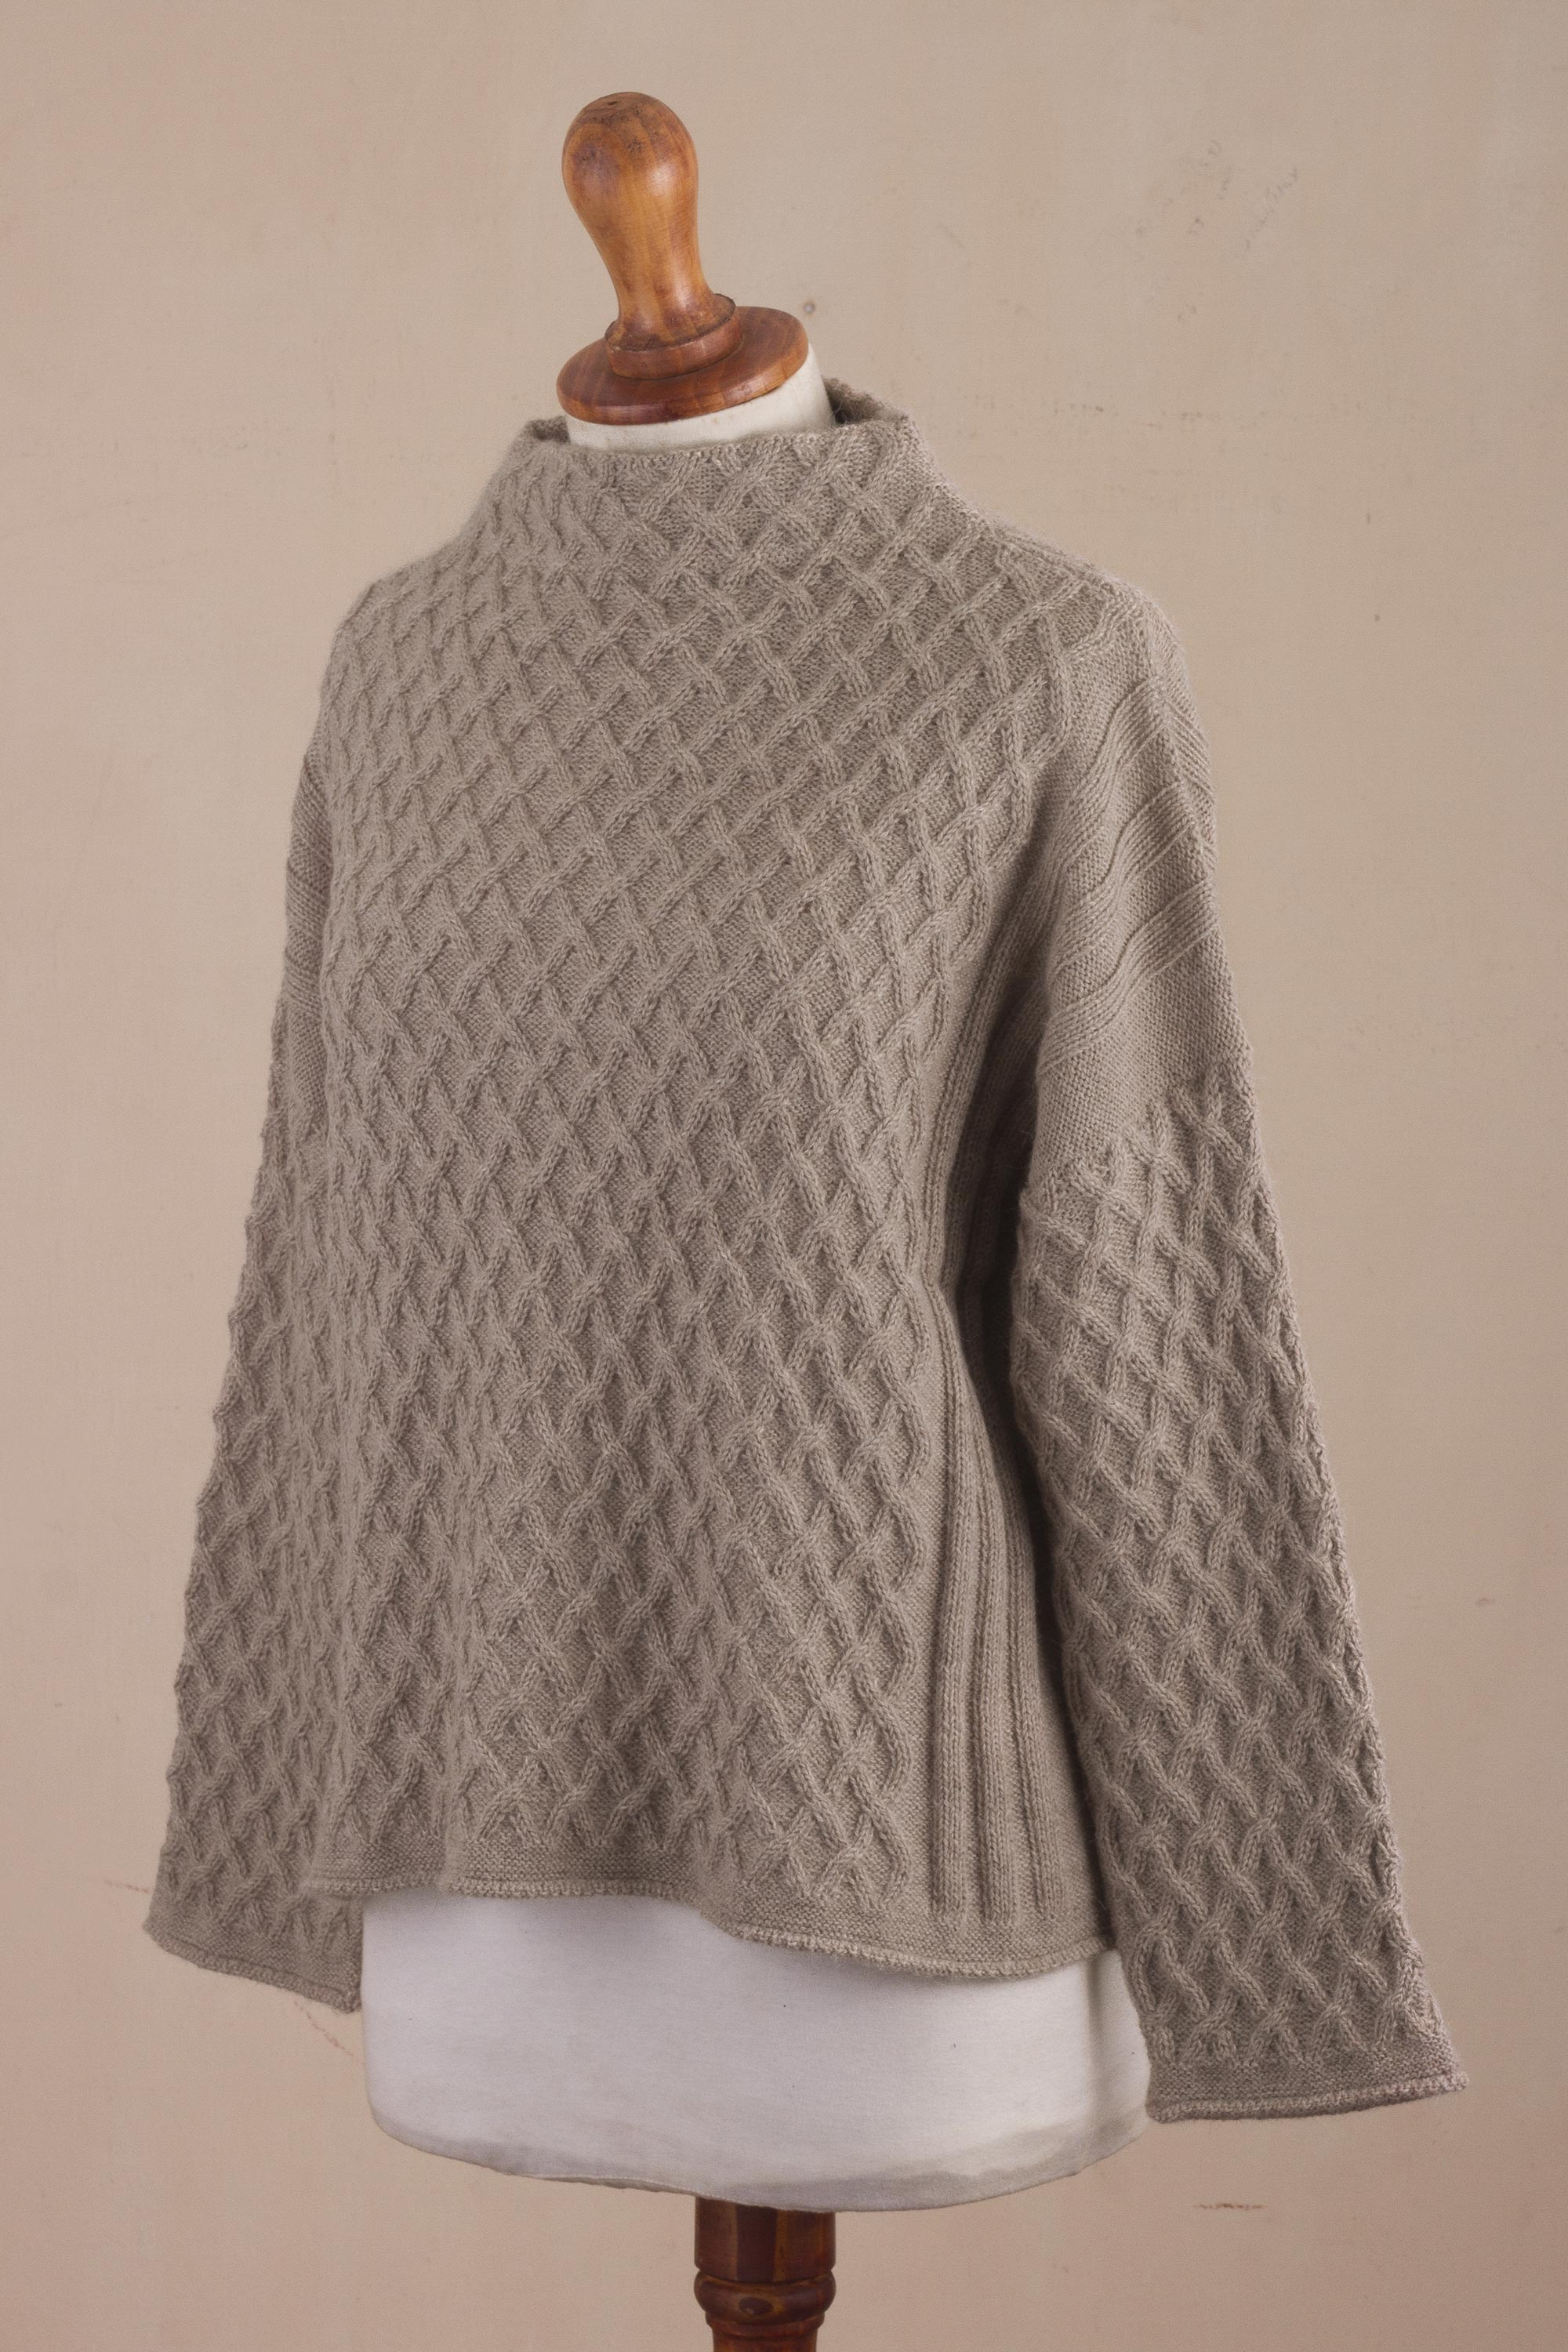 UNICEF Market | 100% Alpaca Knitted Taupe Brown Sweater from Peru - Lea